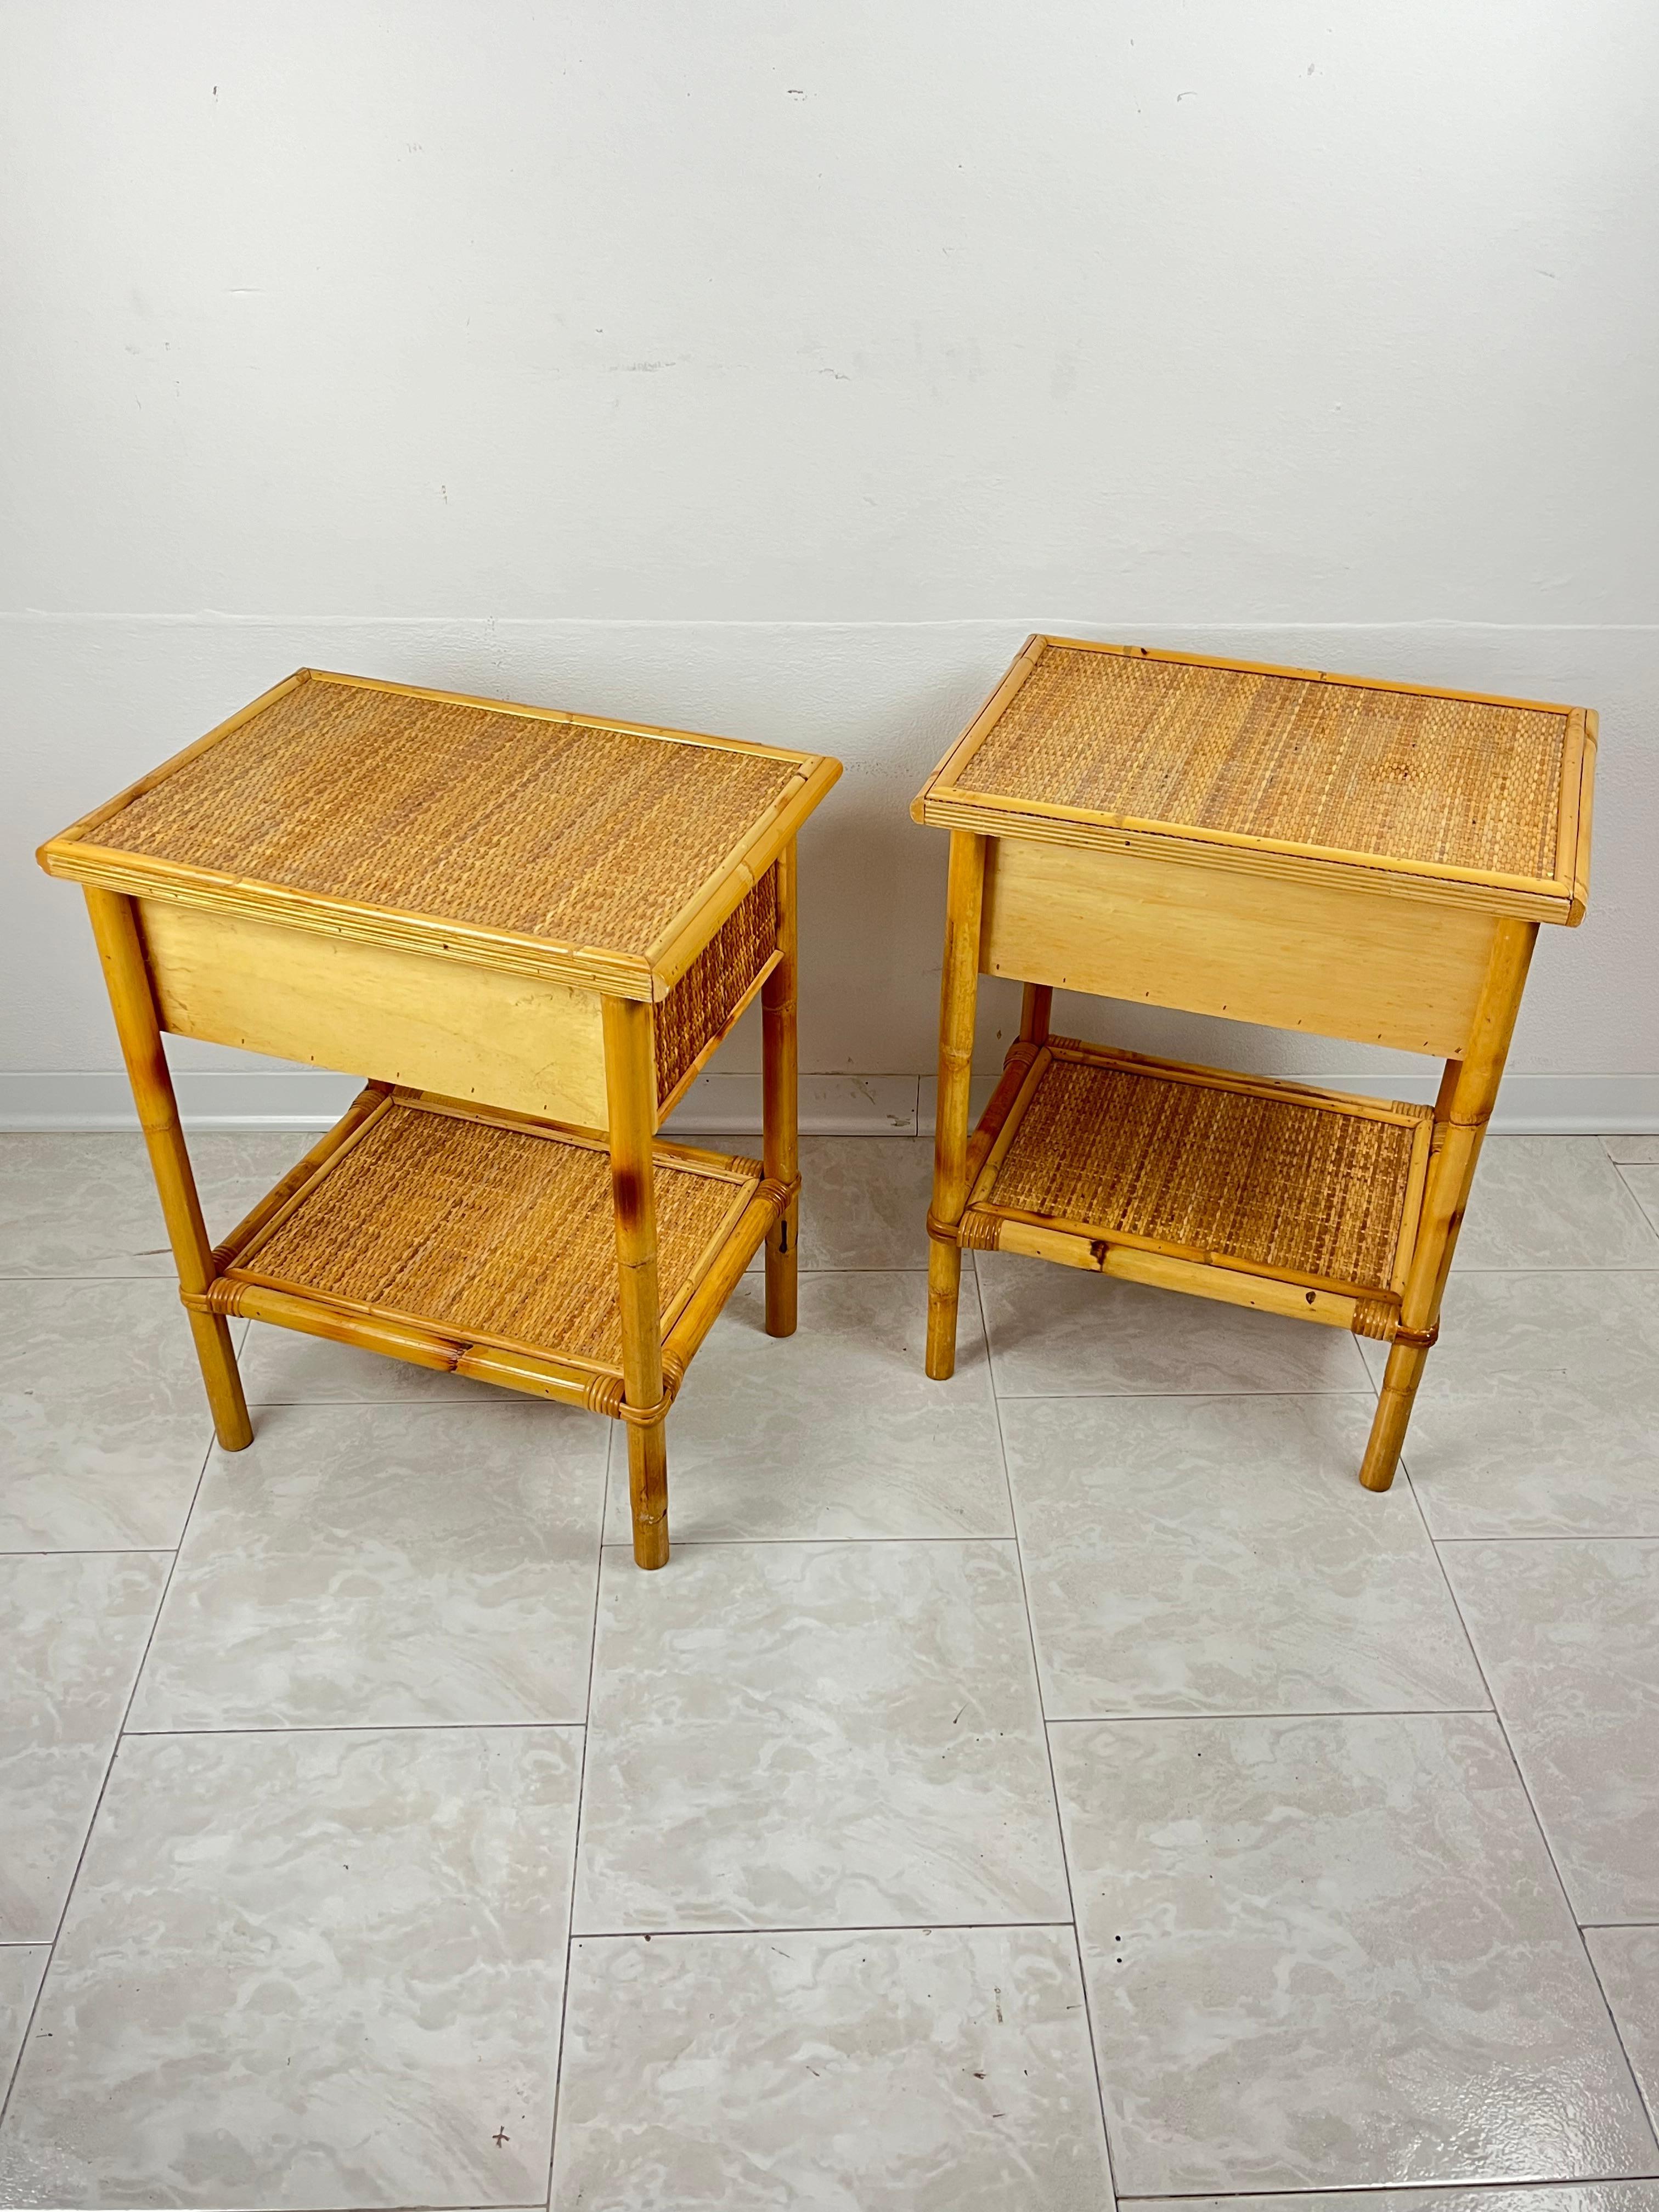 Late 20th Century Pair of Rattan and Bamboo Bedside Tables Mid-Century Italian Design For Sale